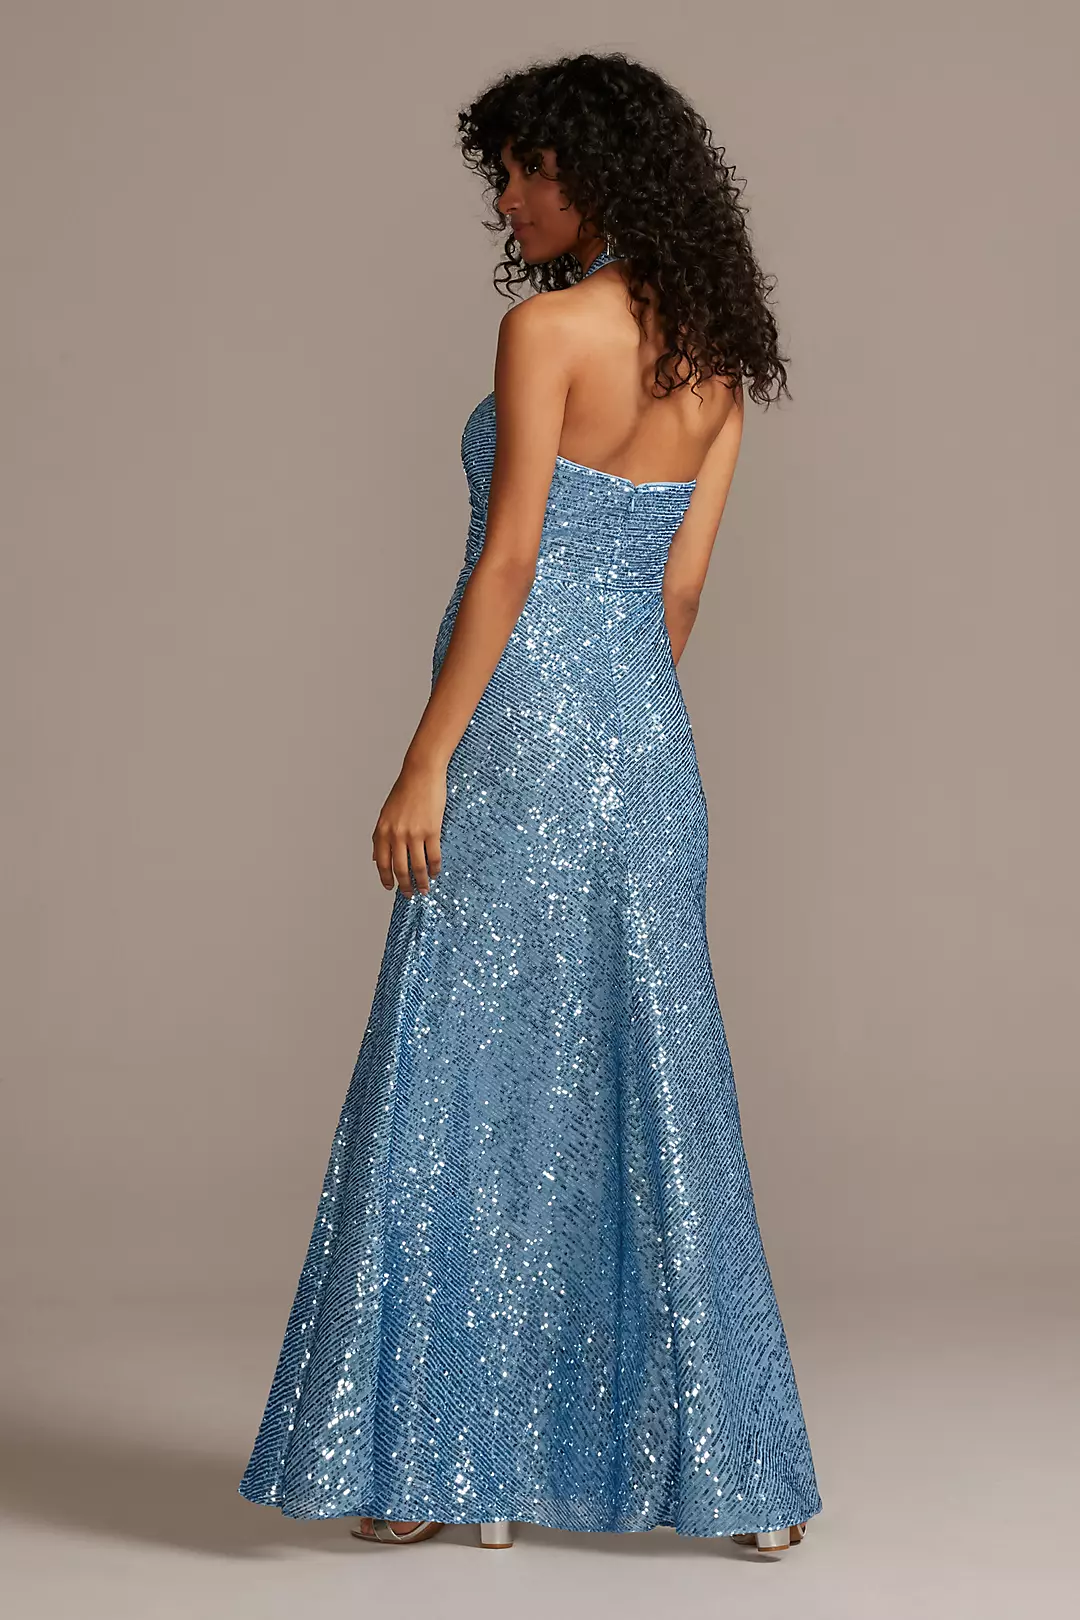 Sequin Halter Dress with Side Ruching and Slit Image 2